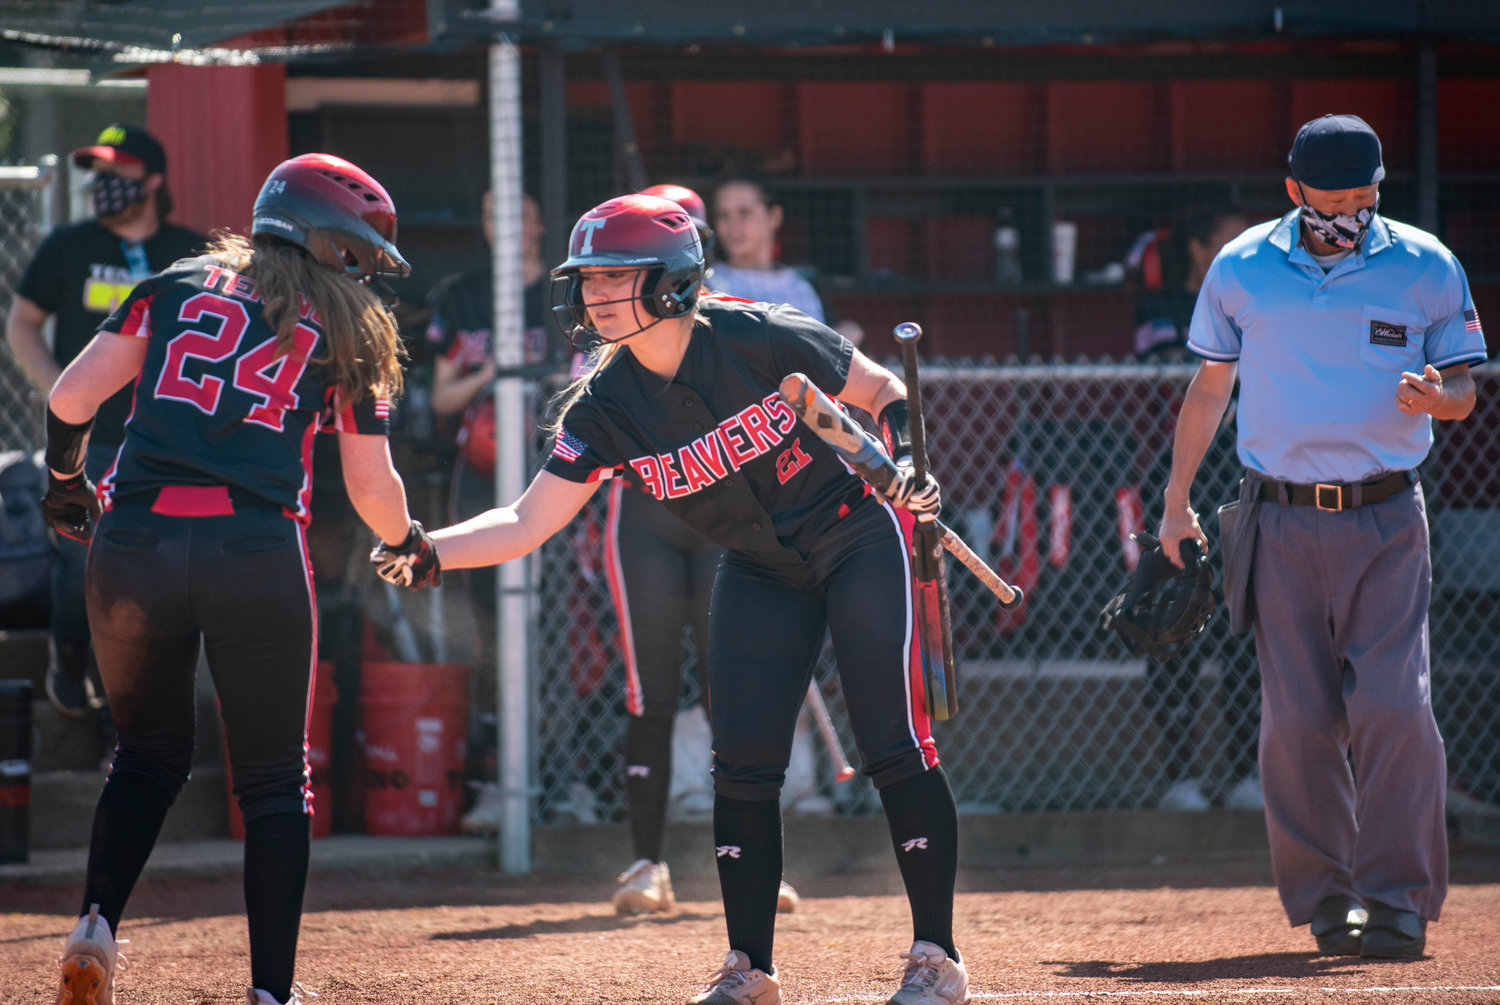 Tenino senior Cassie Cannon (21) congratulates junior Abby Severse (24) after Severse scores in the bottom of the first inning.